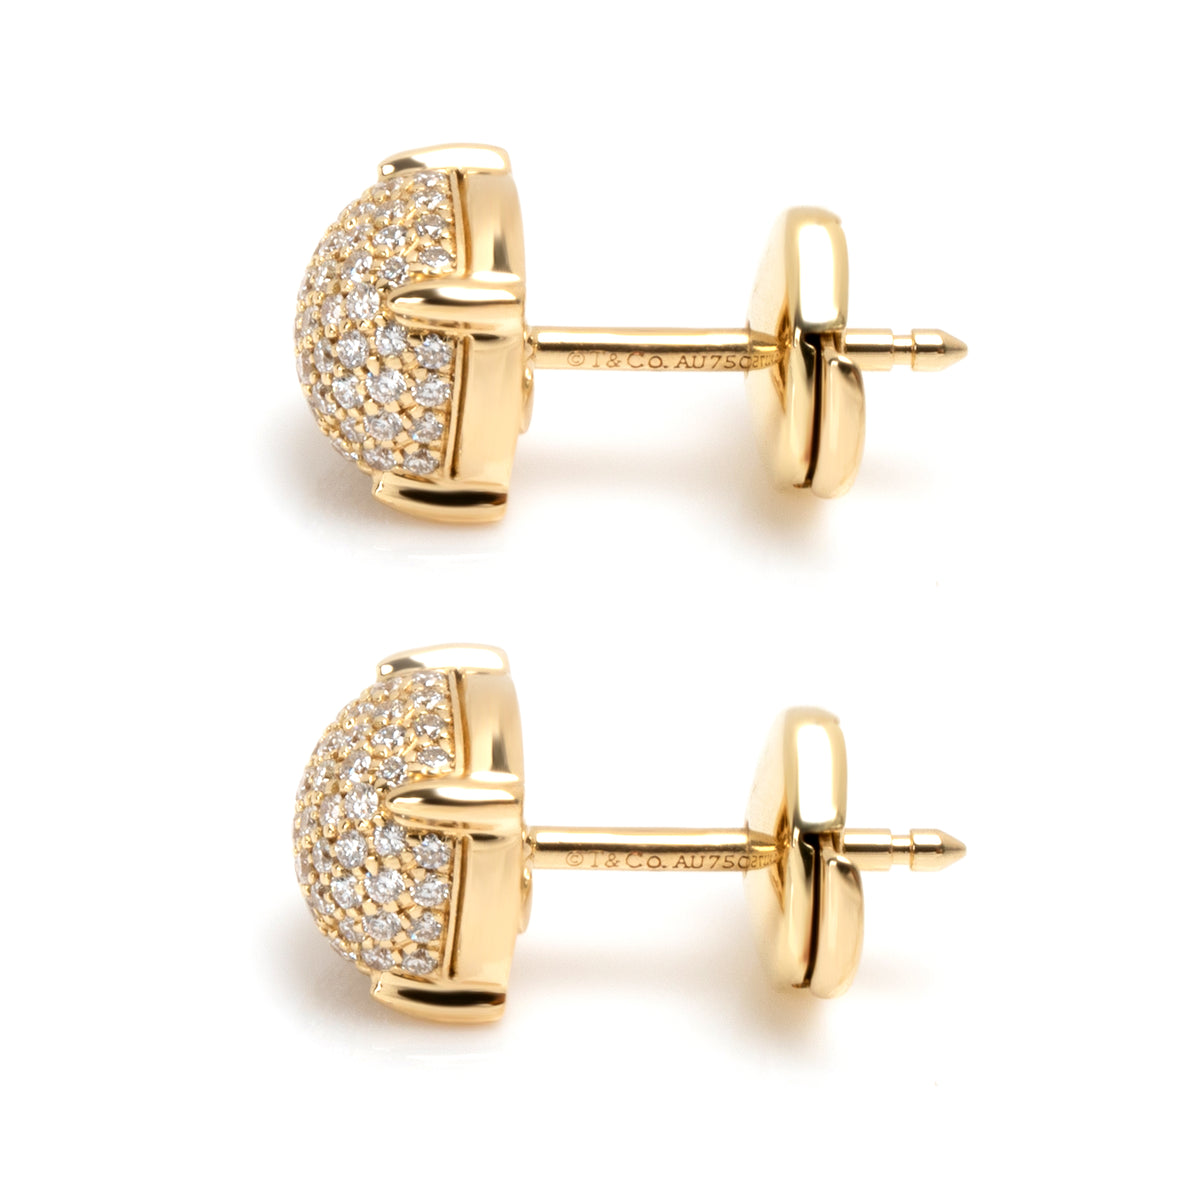 Tiffany & Co. Paloma Picasso Sugar Stacks Diamond Earrings in 18K Yellow Gold